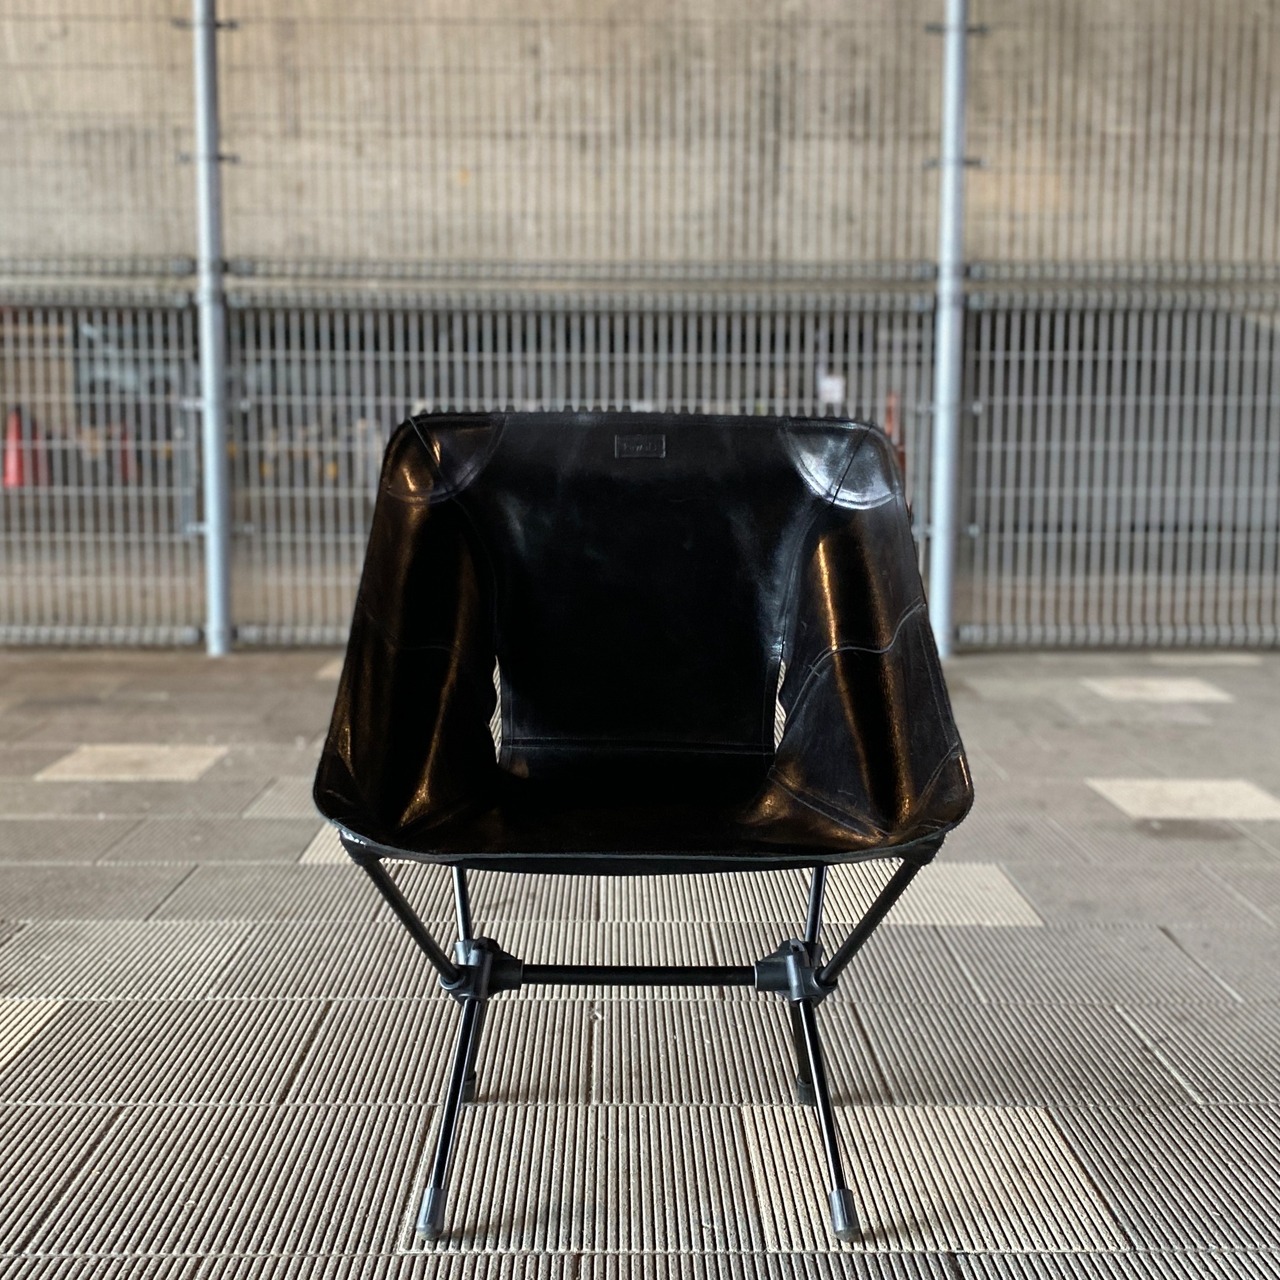 【kawais】 leather chair seat<Souther>_black